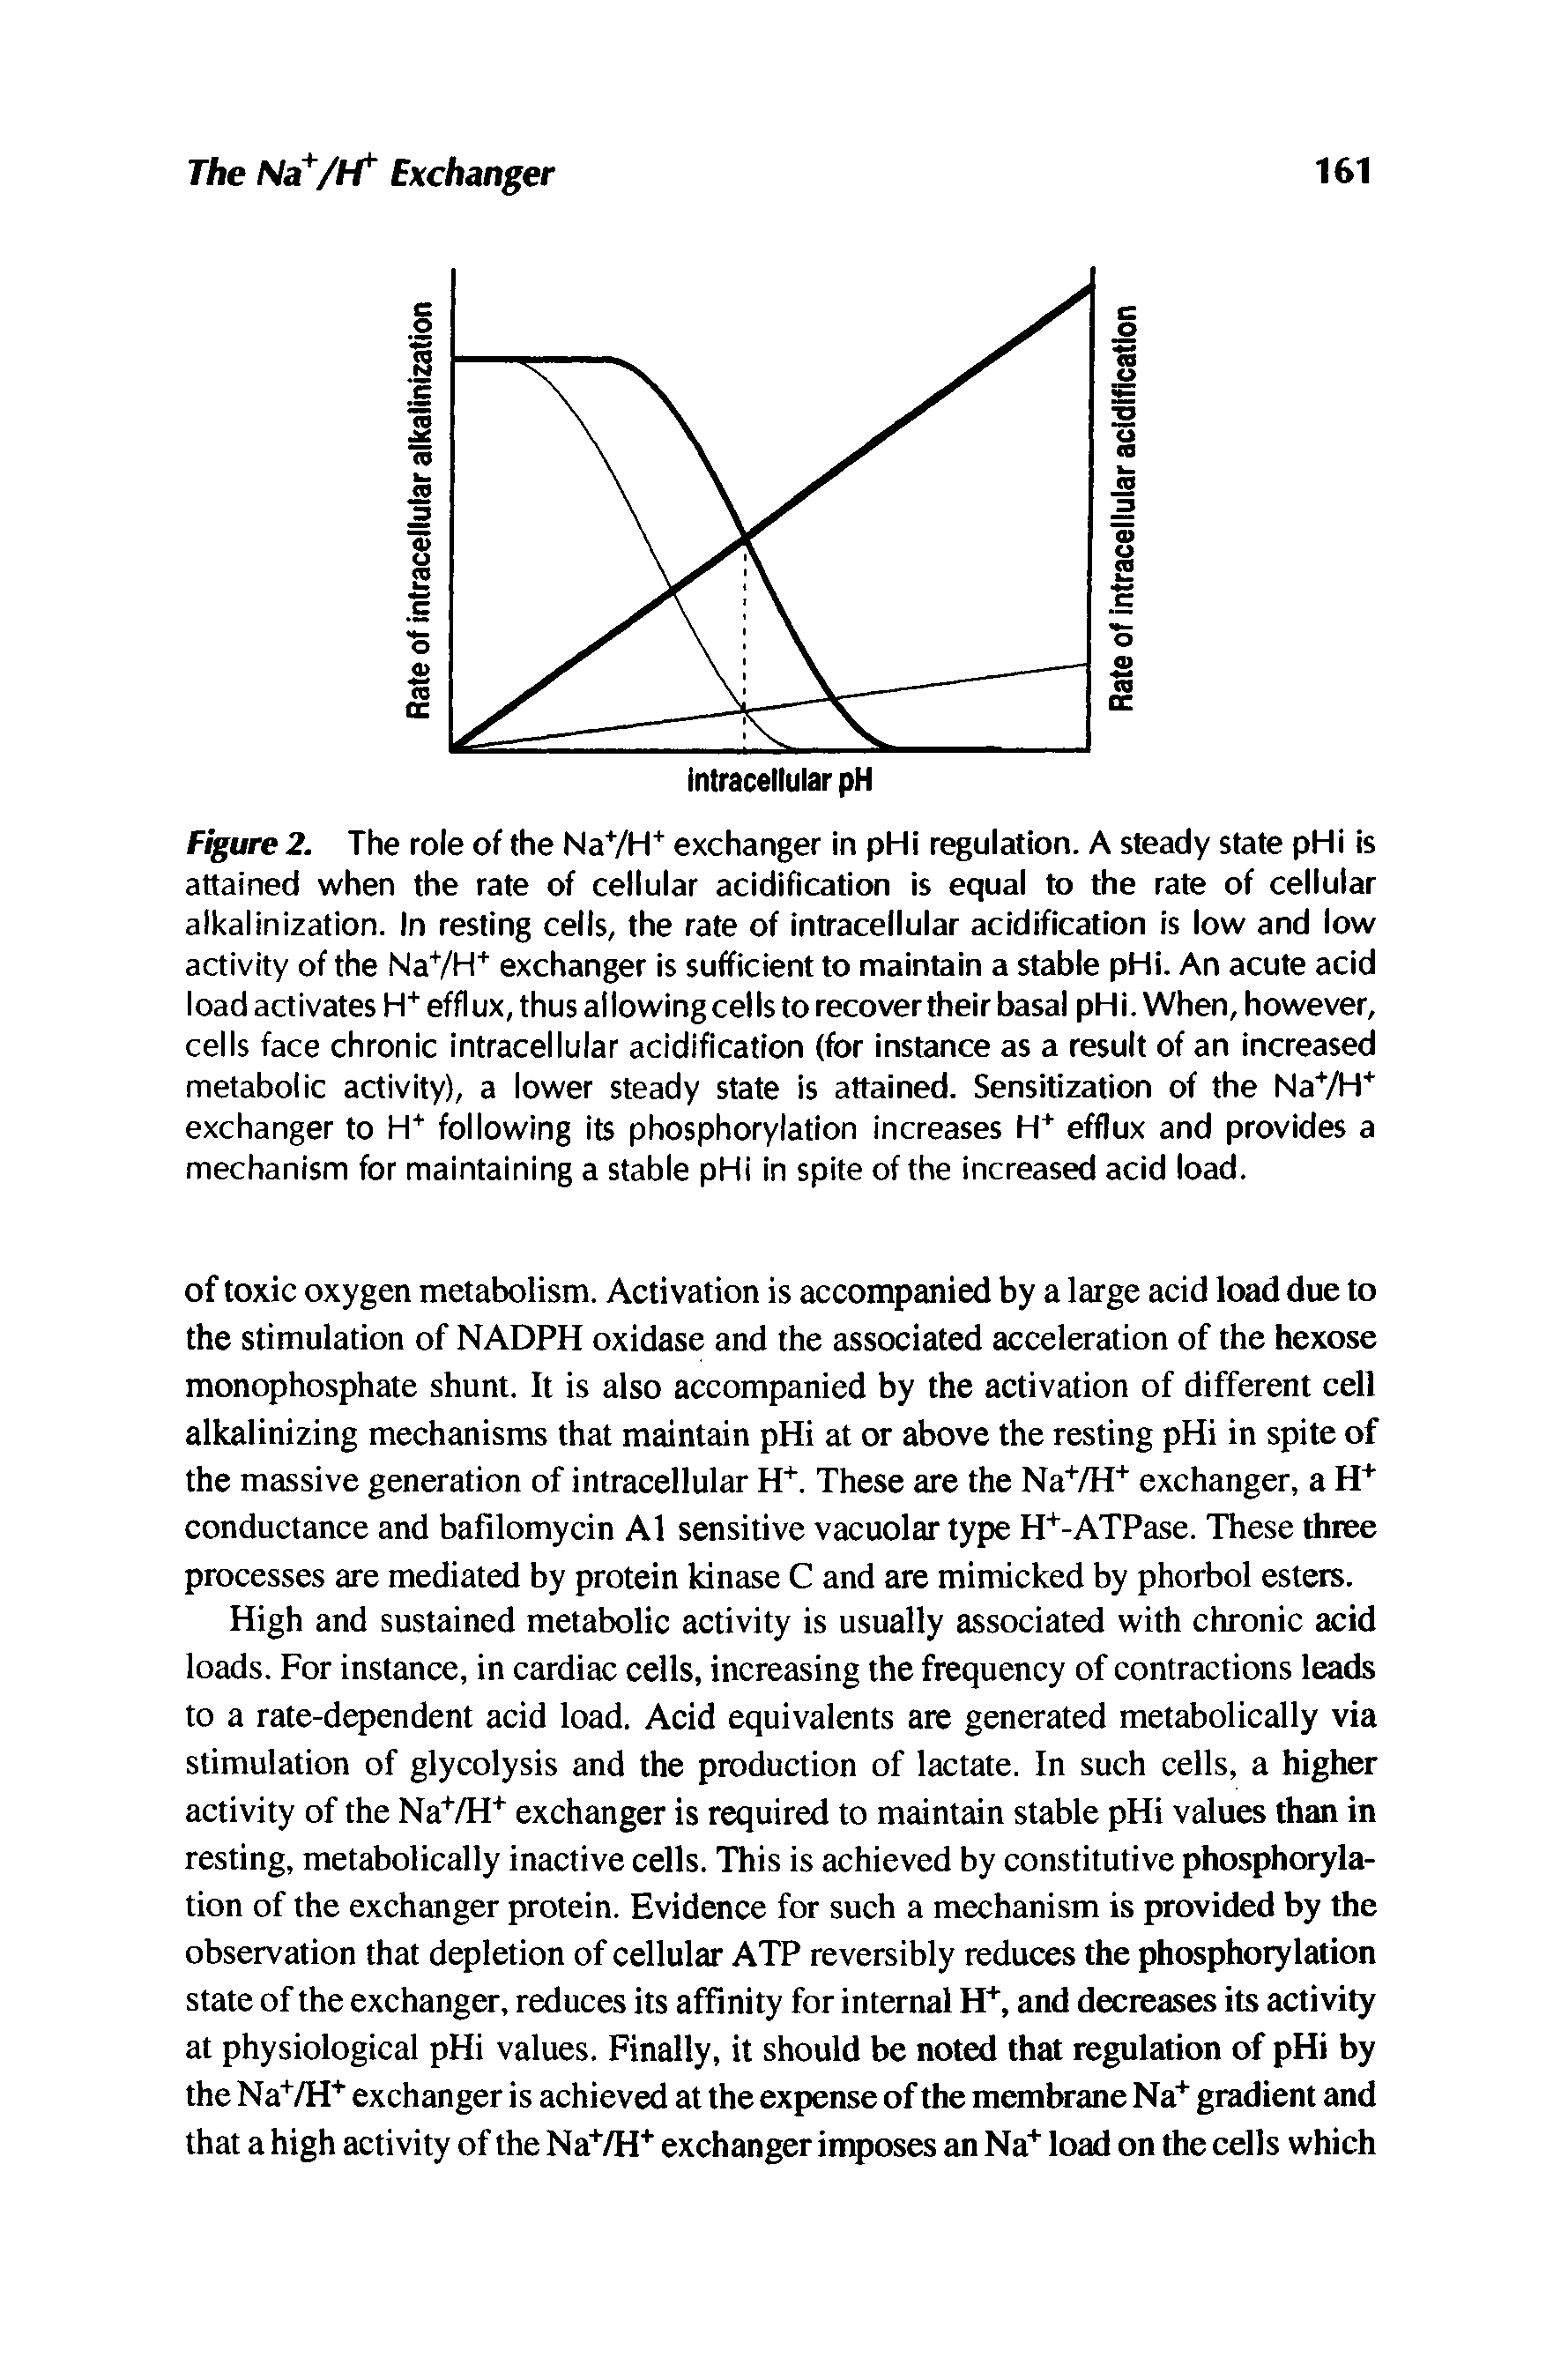 Figure 2. The role of the Na+/H+ exchanger in pHi regulation. A steady state pHi is attained when the rate of cellular acidification is equal to the rate of cellular alkalinization. In resting cells, the rate of intracellular acidification is low and low activity of the Na+/H+ exchanger is sufficient to maintain a stable pHi. An acute acid load activates H+ efflux, thus allowing cel Is to recover their basal pHi. When, however, cells face chronic intracellular acidification (for instance as a result of an increased metabolic activity), a lower steady state is attained. Sensitization of the Na+/H+ exchanger to H+ following its phosphorylation increases H+ efflux and provides a mechanism for maintaining a stable pHi in spite of the increased acid load.